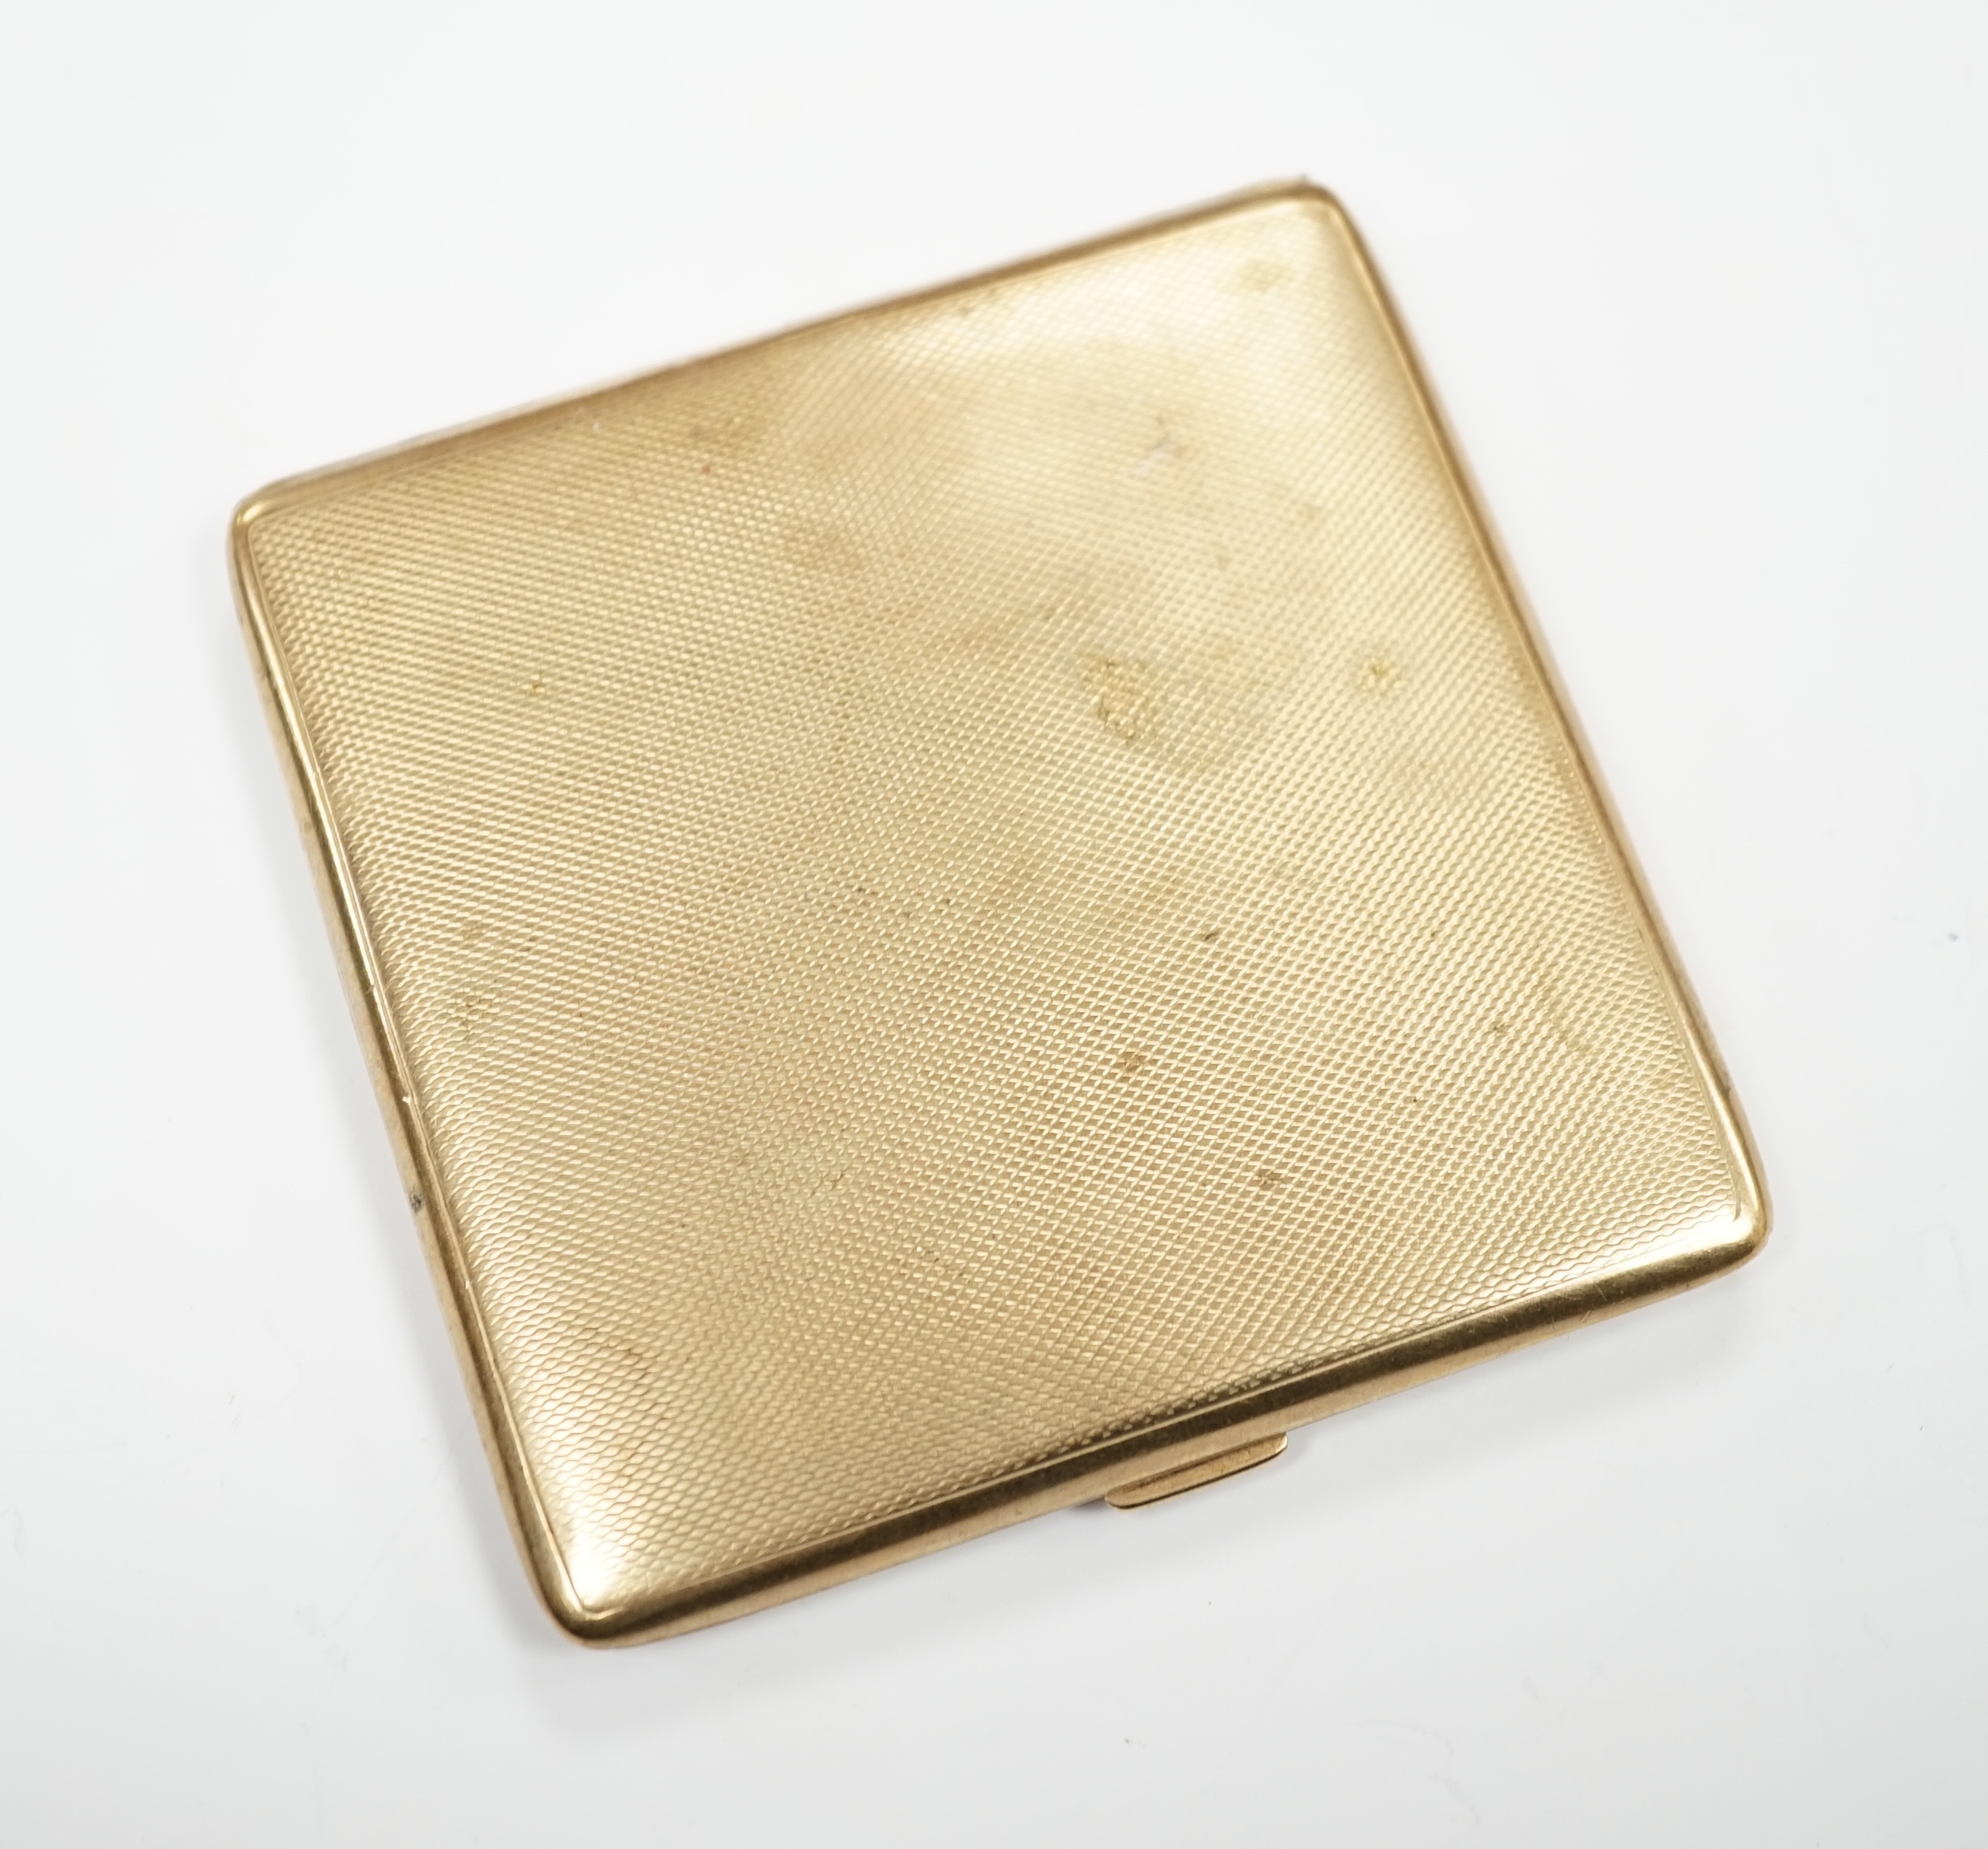 A George V square engine turned 9ct gold cigarette case by S. Blanckensee & Sons Ltd., Birmingham, 1928, 85MM, gross weight 106 grams.